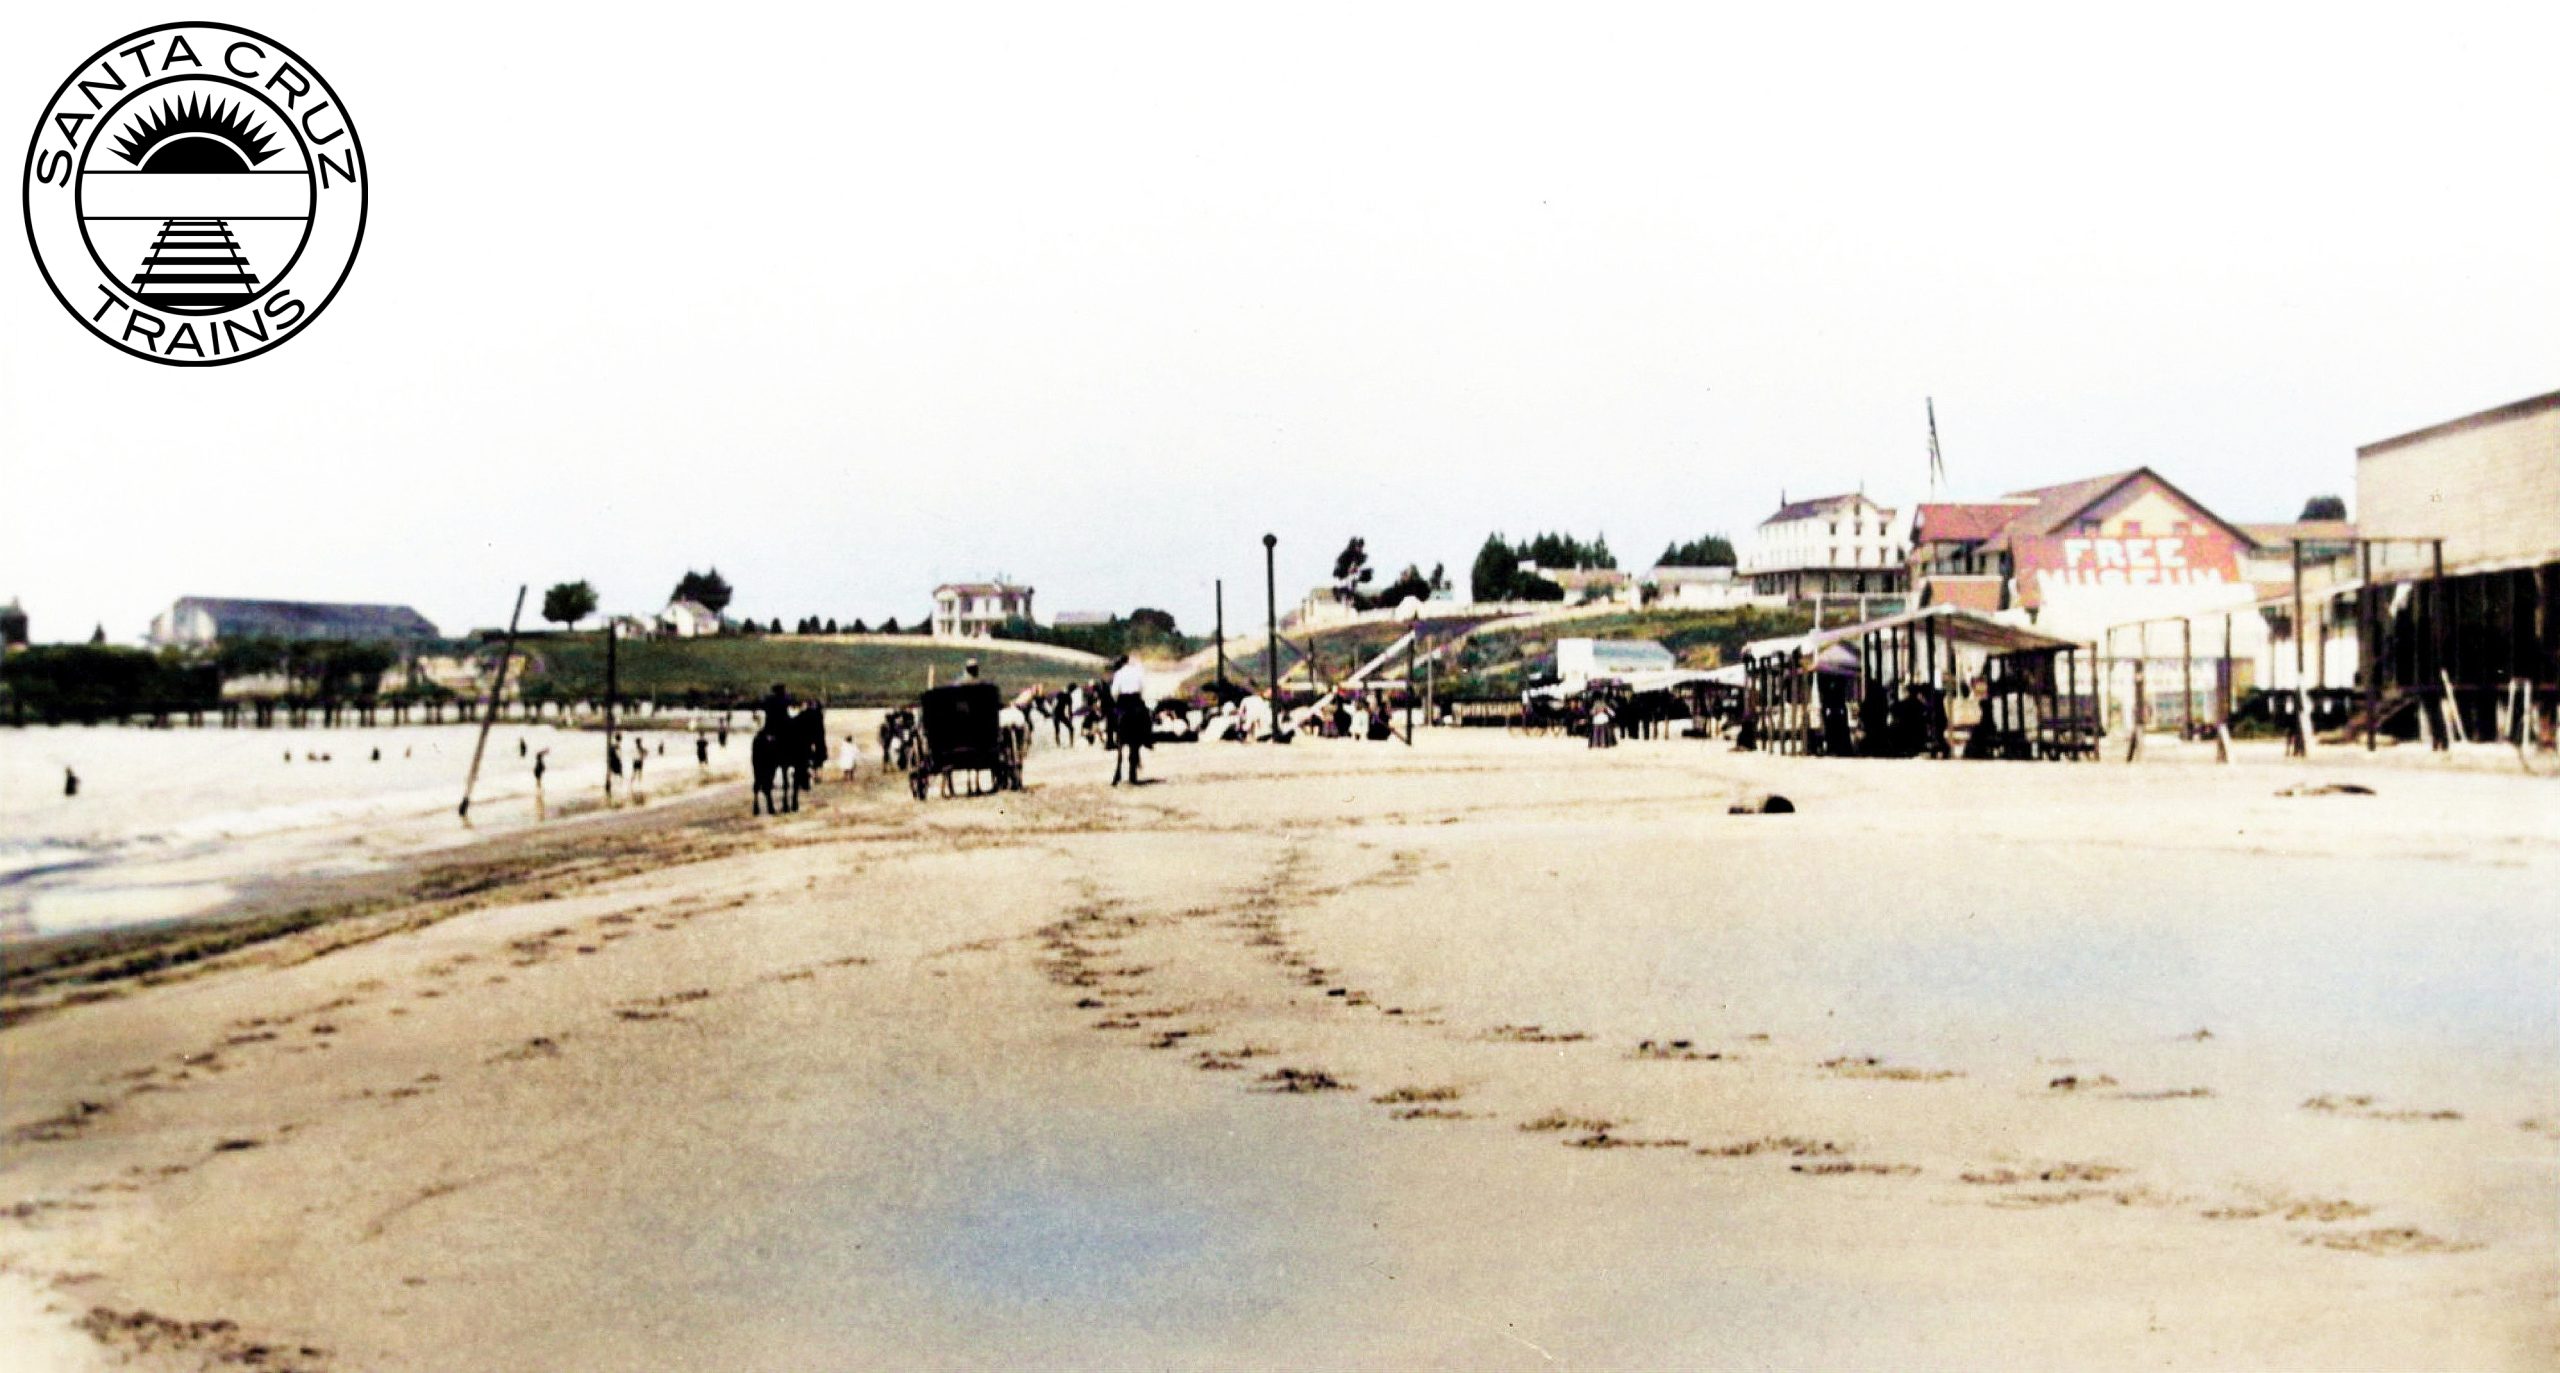 Buggies and swimmers at the beach, ca 1885 [UCSC]